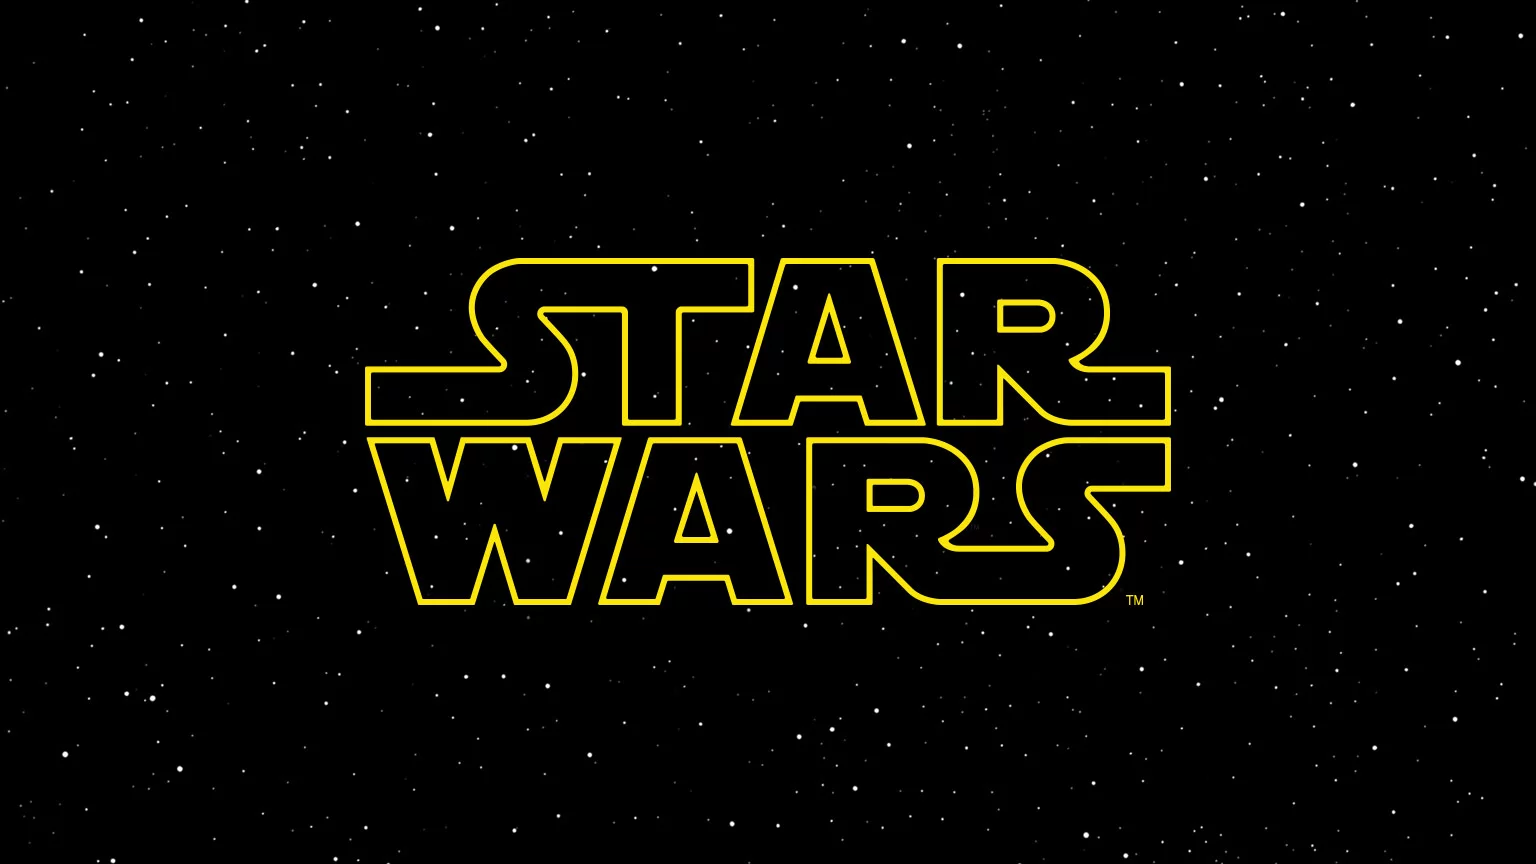 How to watch star wars chronologically - Star Wars watching order